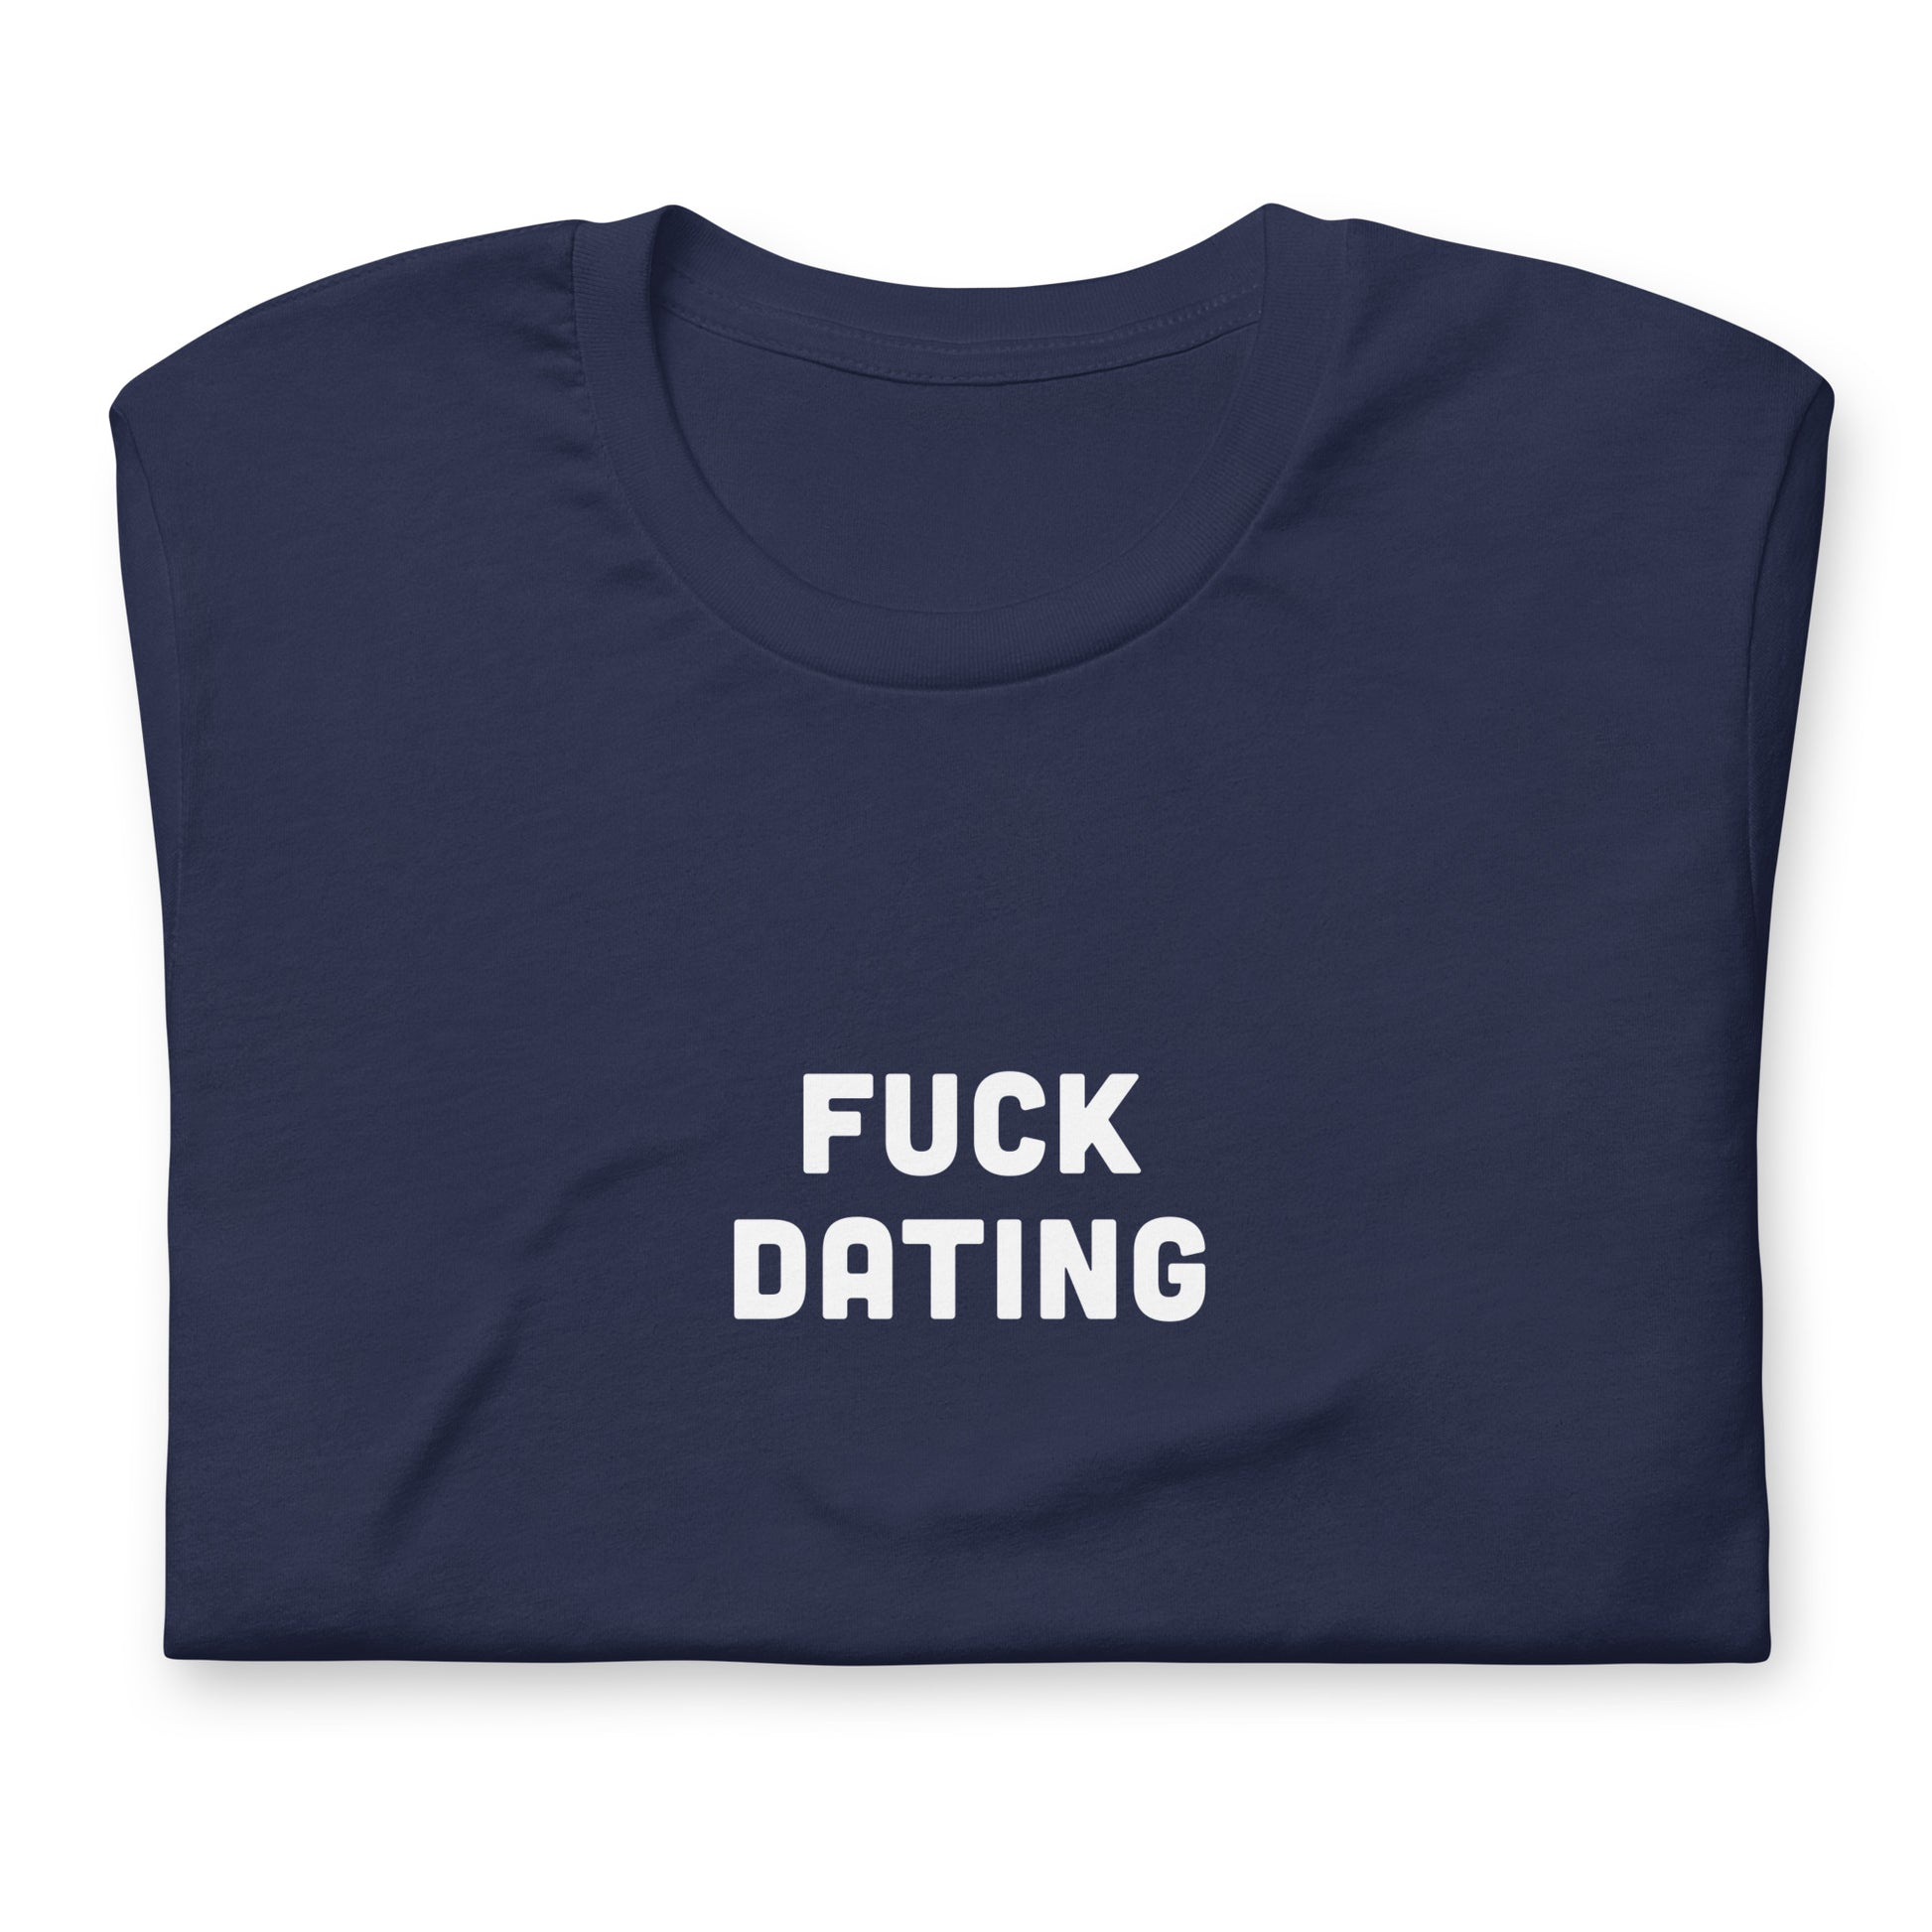 Fuck Dating T-Shirt Size XL Color Black